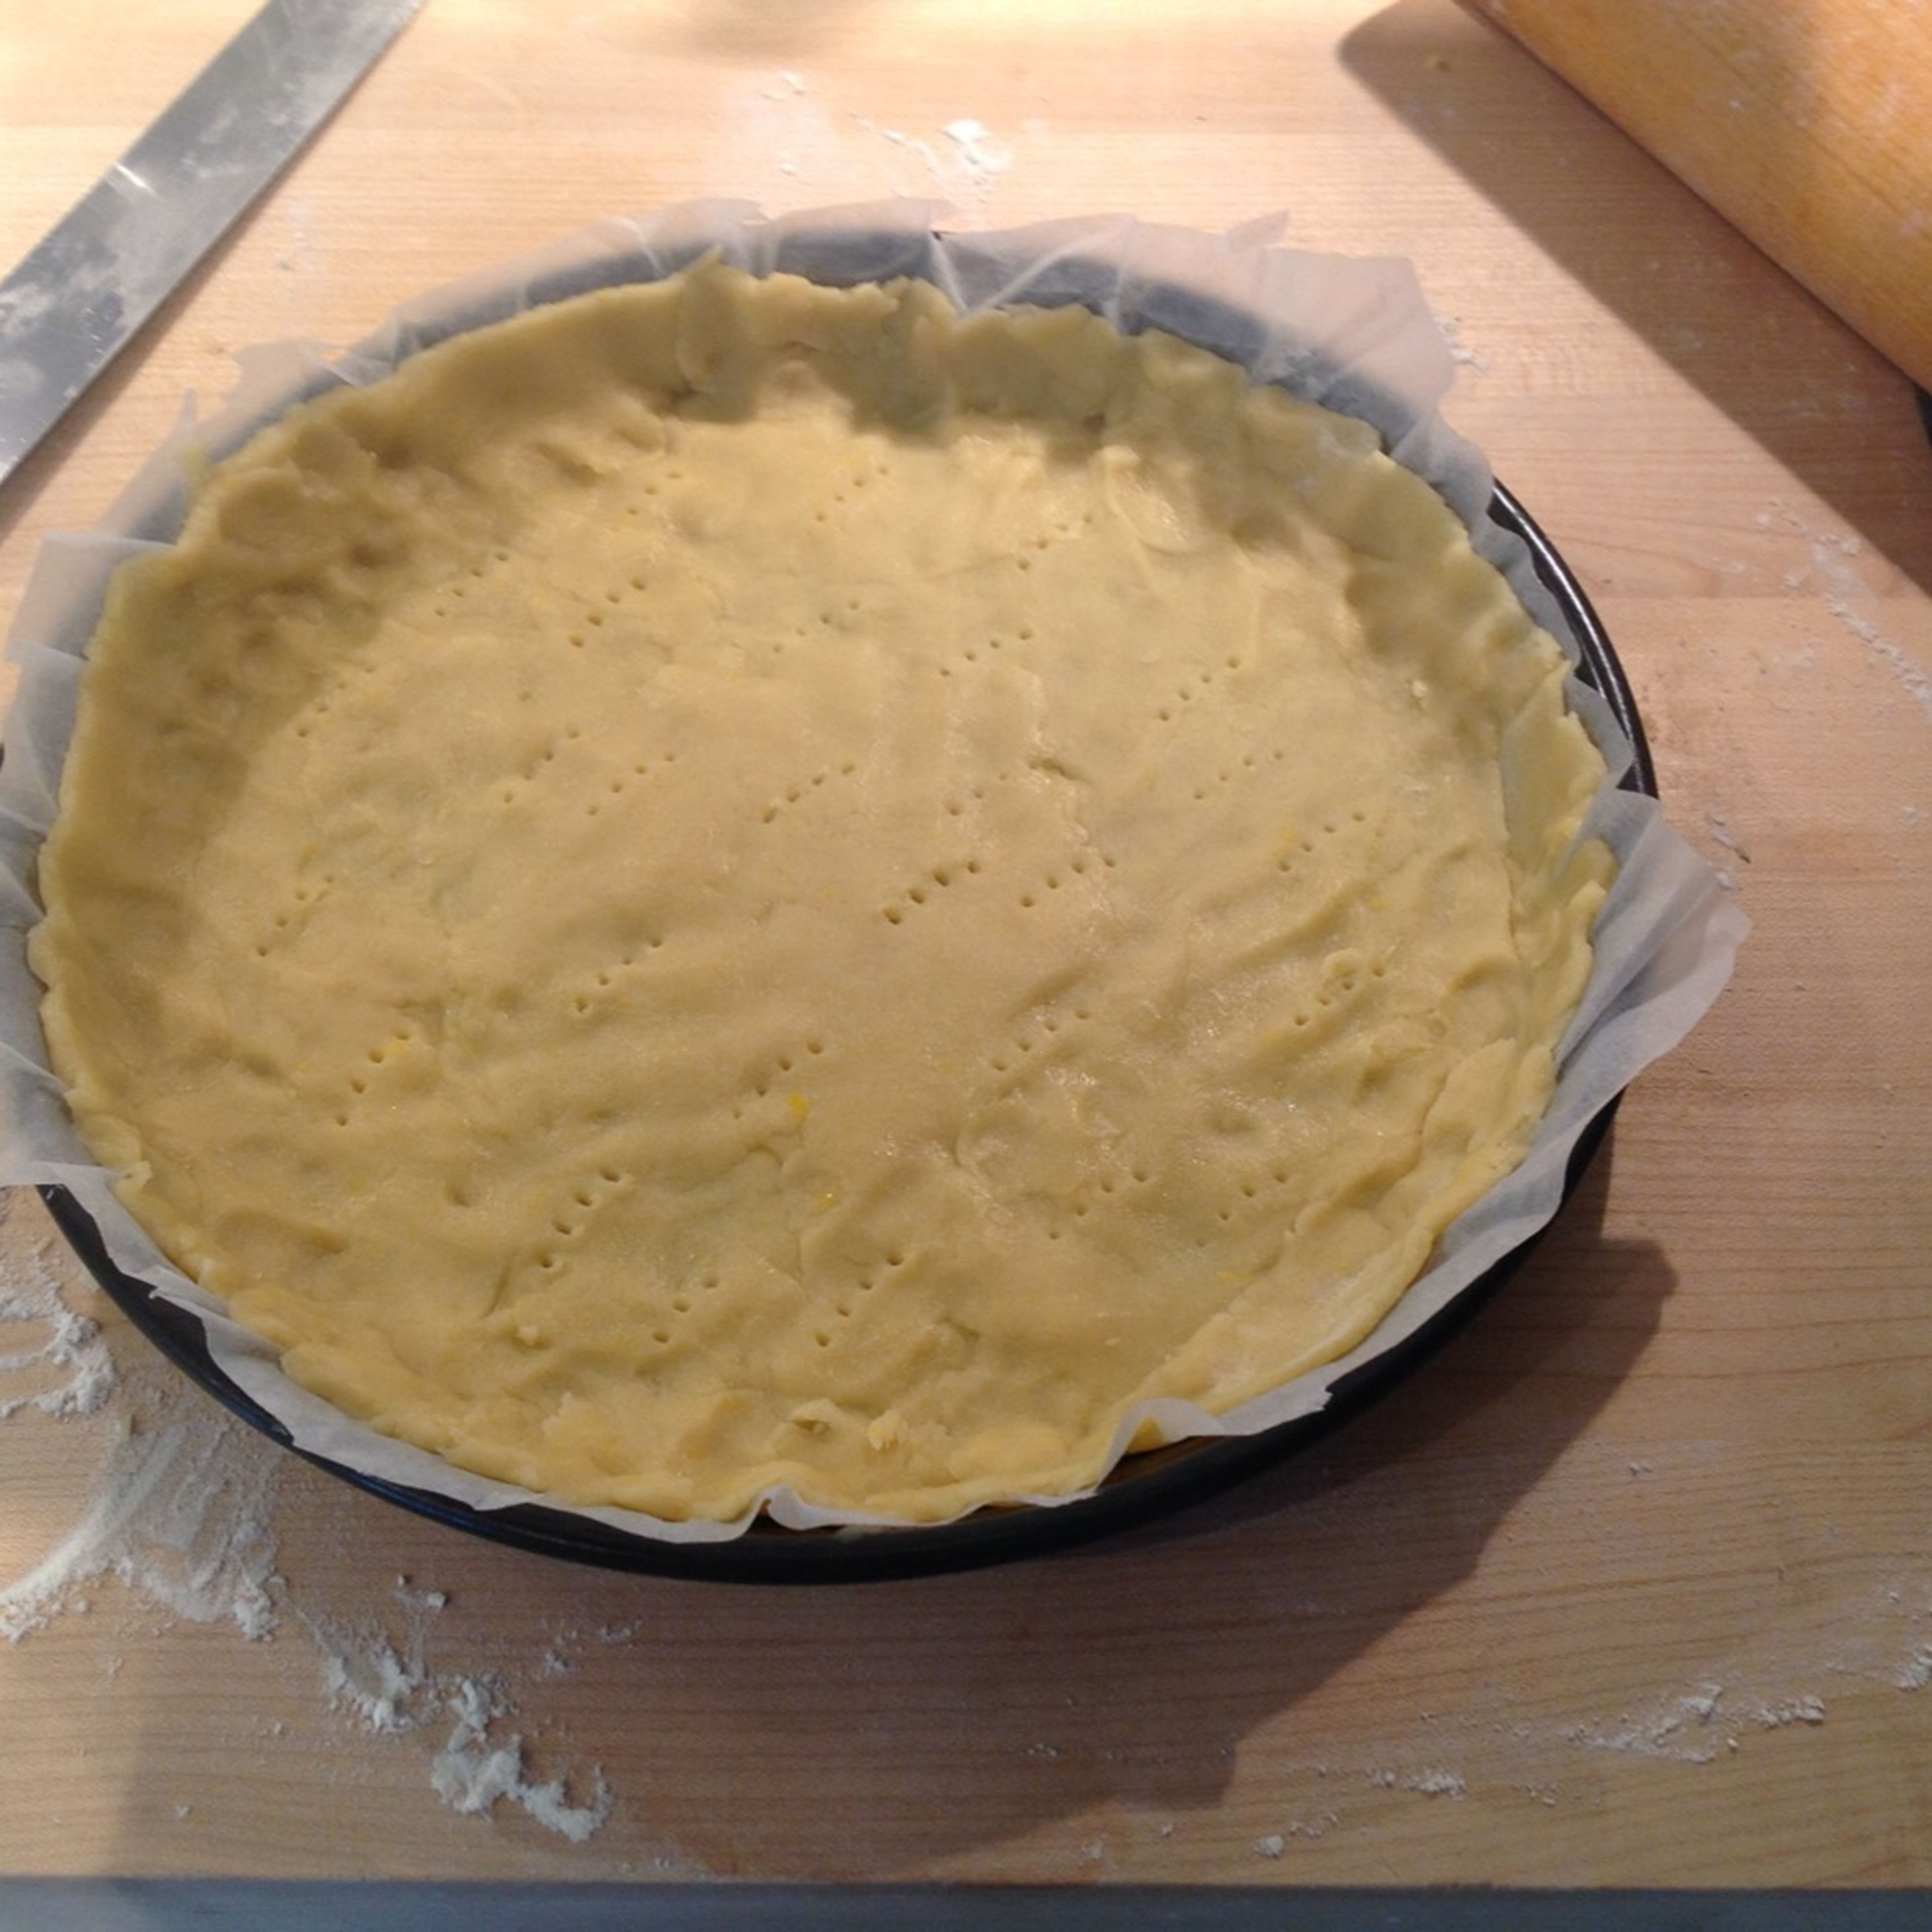 Put dough in a pie dish lined with parchment paper. Pierce dough all over with a fork.